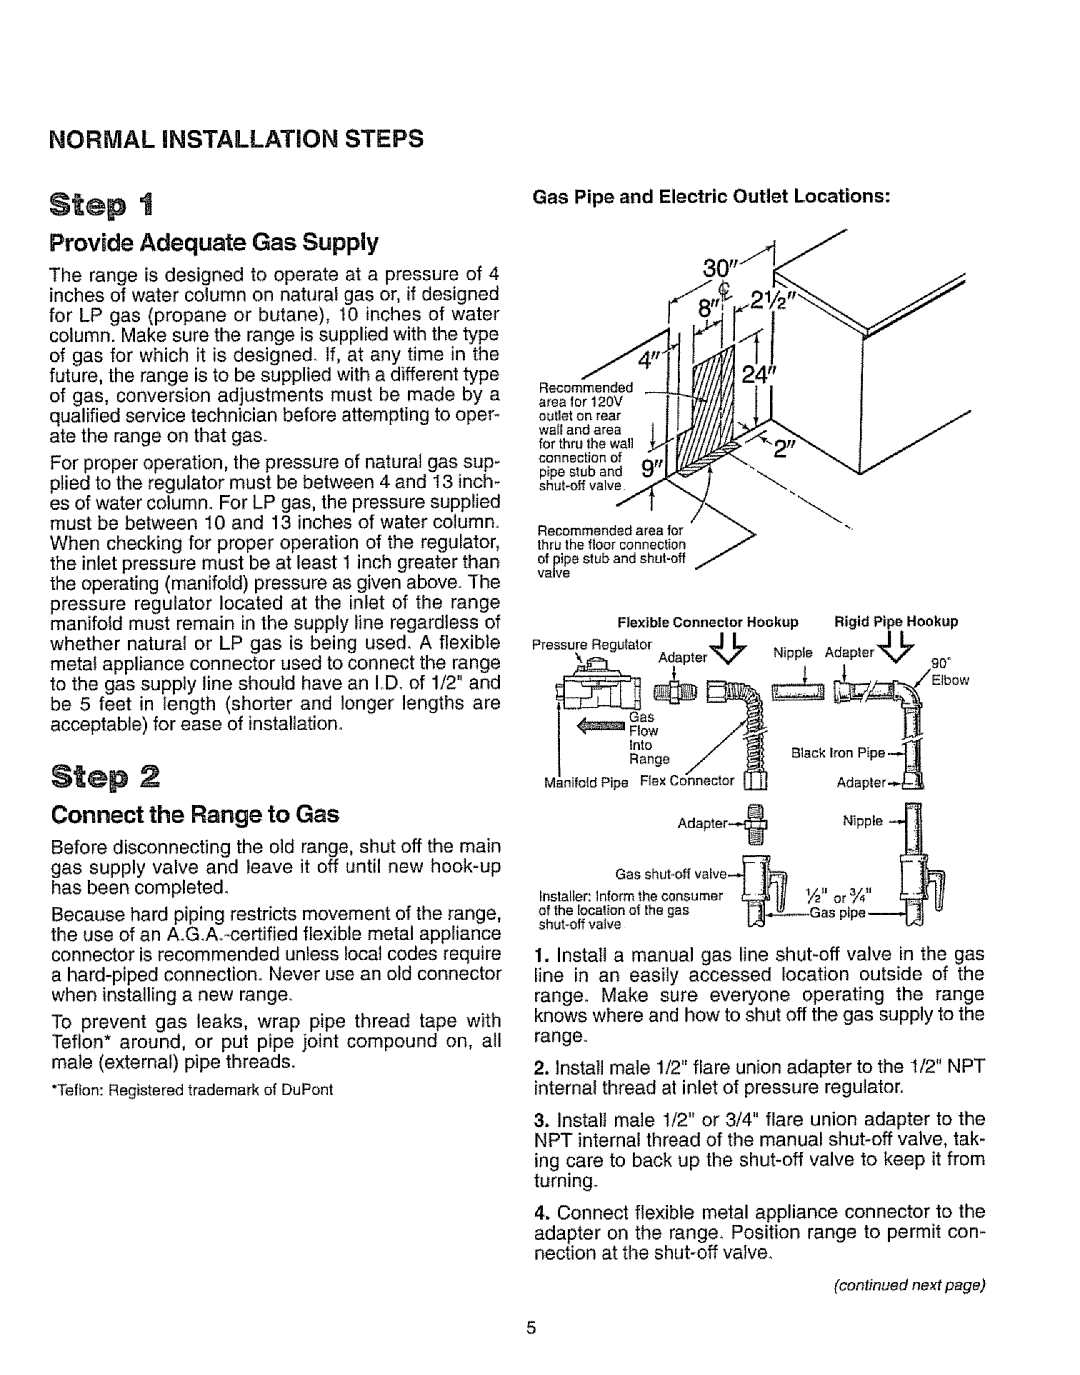 Sears 73318 Step t, Adapter, Nipp e, NORMAL iNSTALLATiON STEPS, Provide Adequate Gas Supply, Connect the Range to Gas 